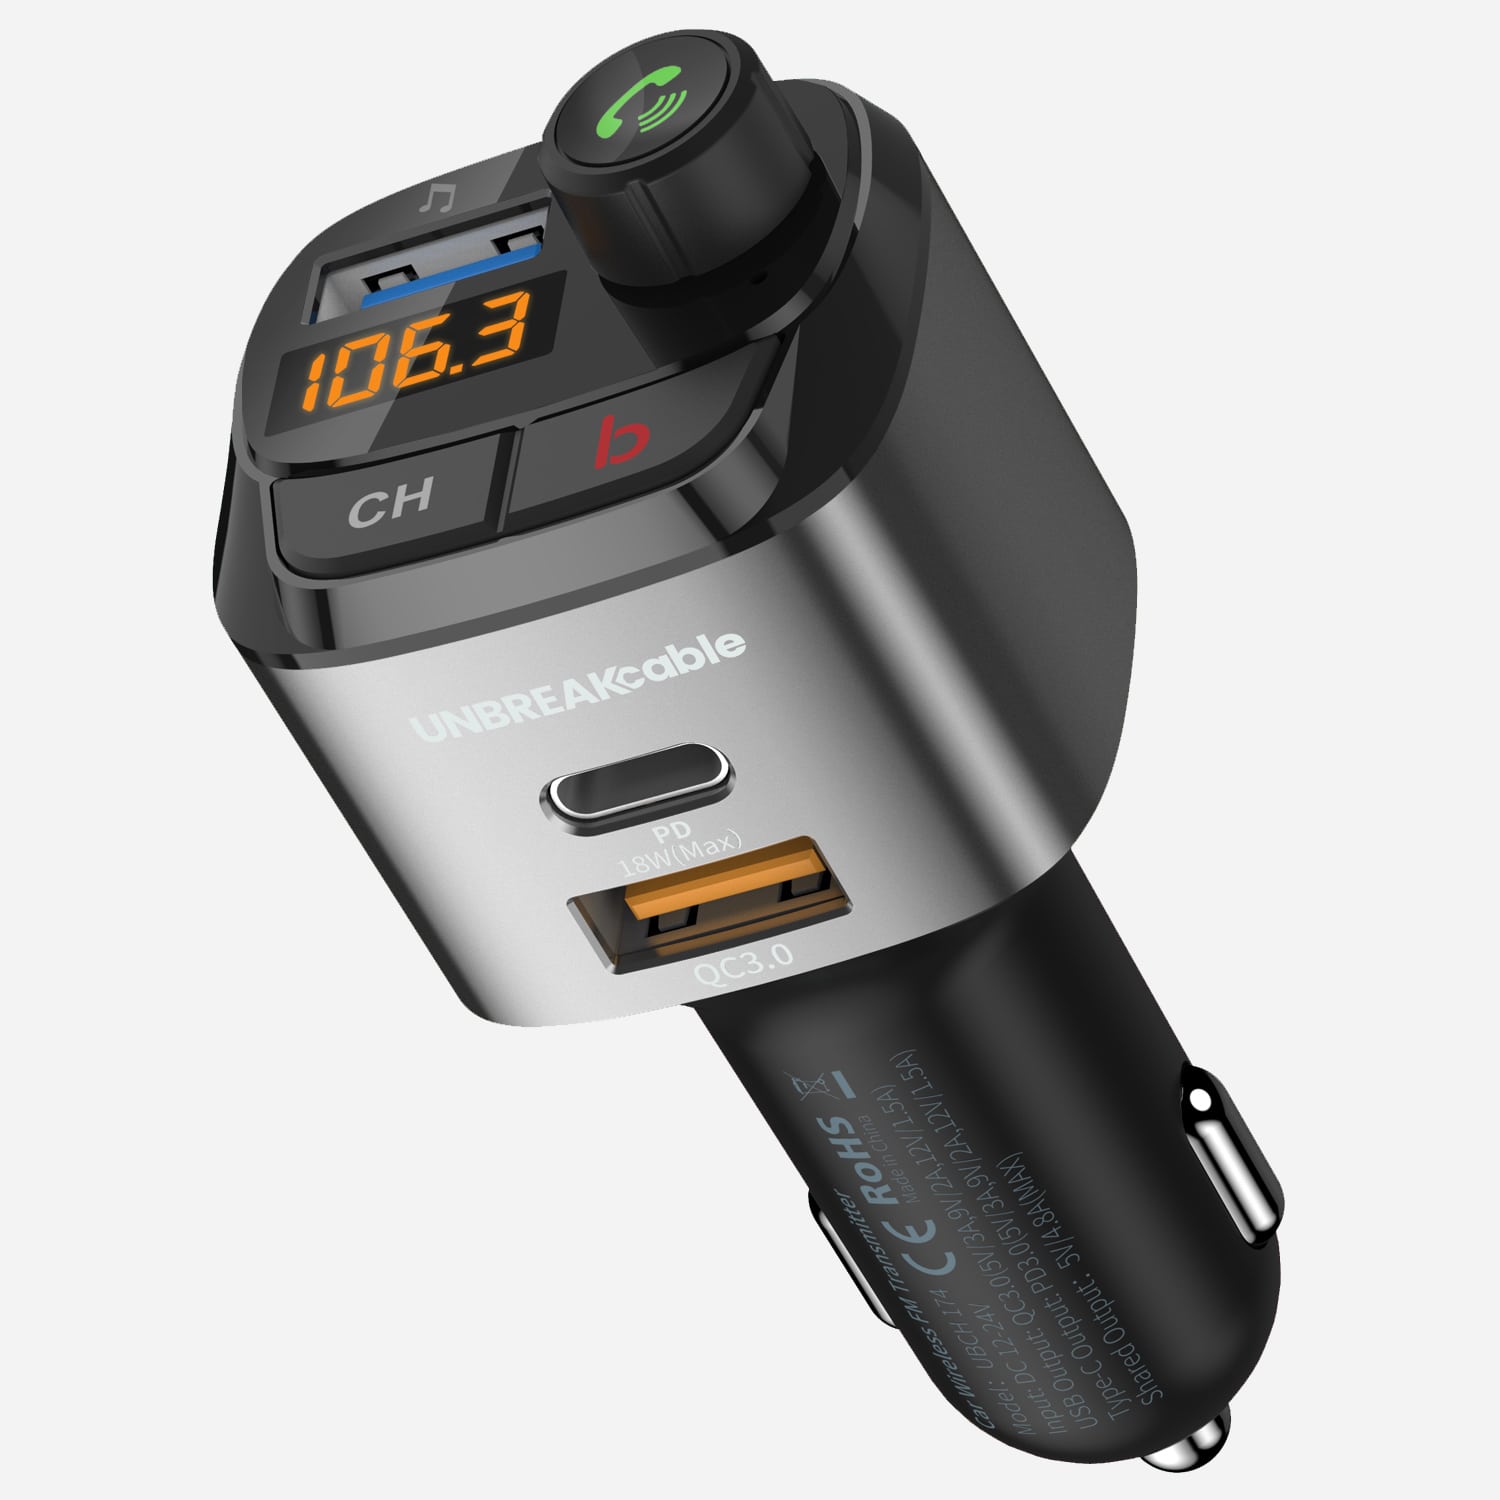 Bluetooth Adapter Car Usb Charger With Pd3.0 Dual Qc 3.0 Usb